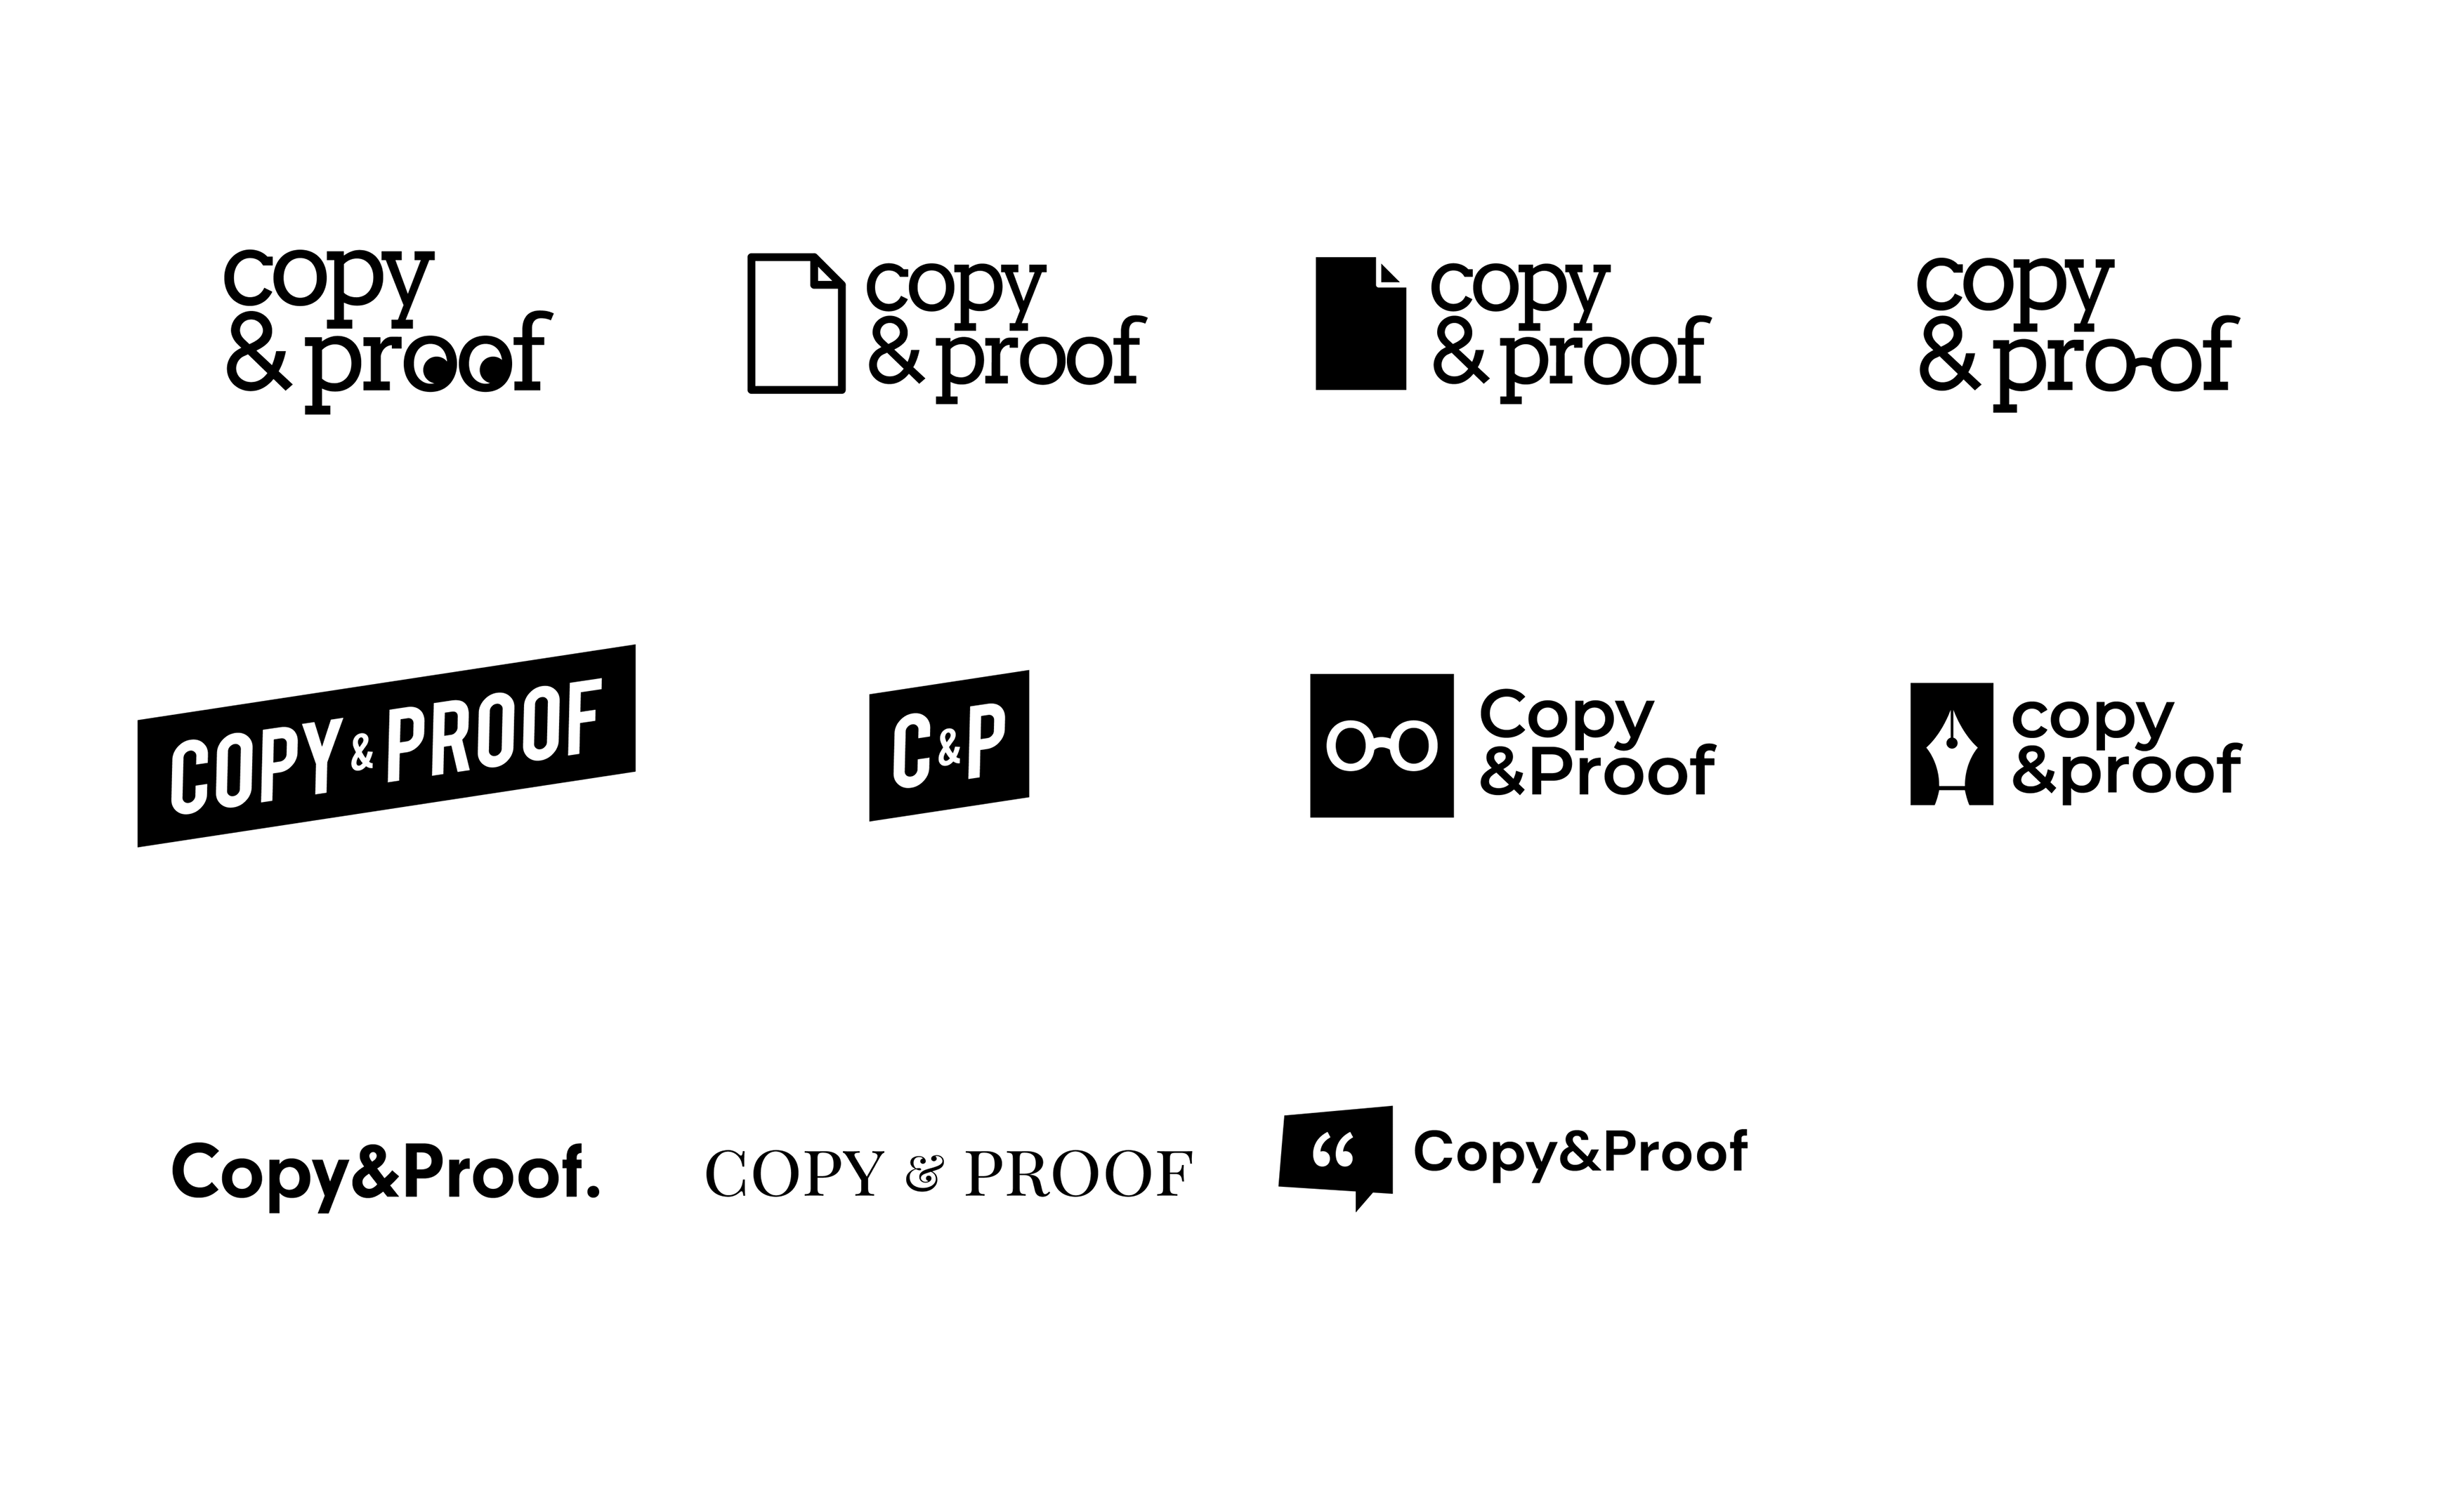 Digital versions of the Copy and Proof logo